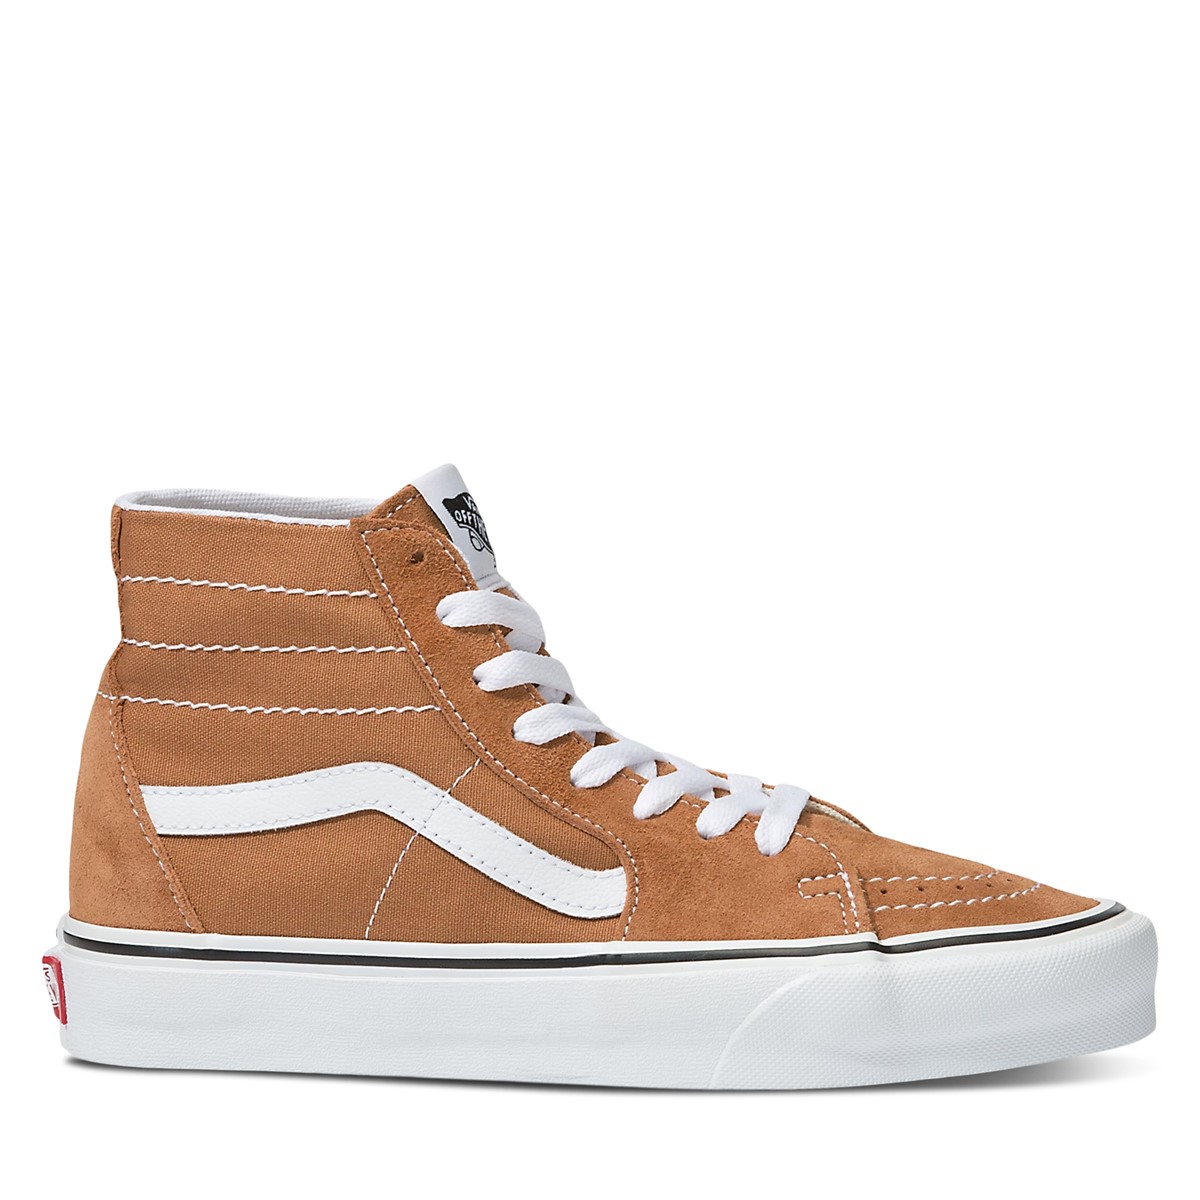 Baskets SK8-Hi Tapered rouille et blanches pour hommes